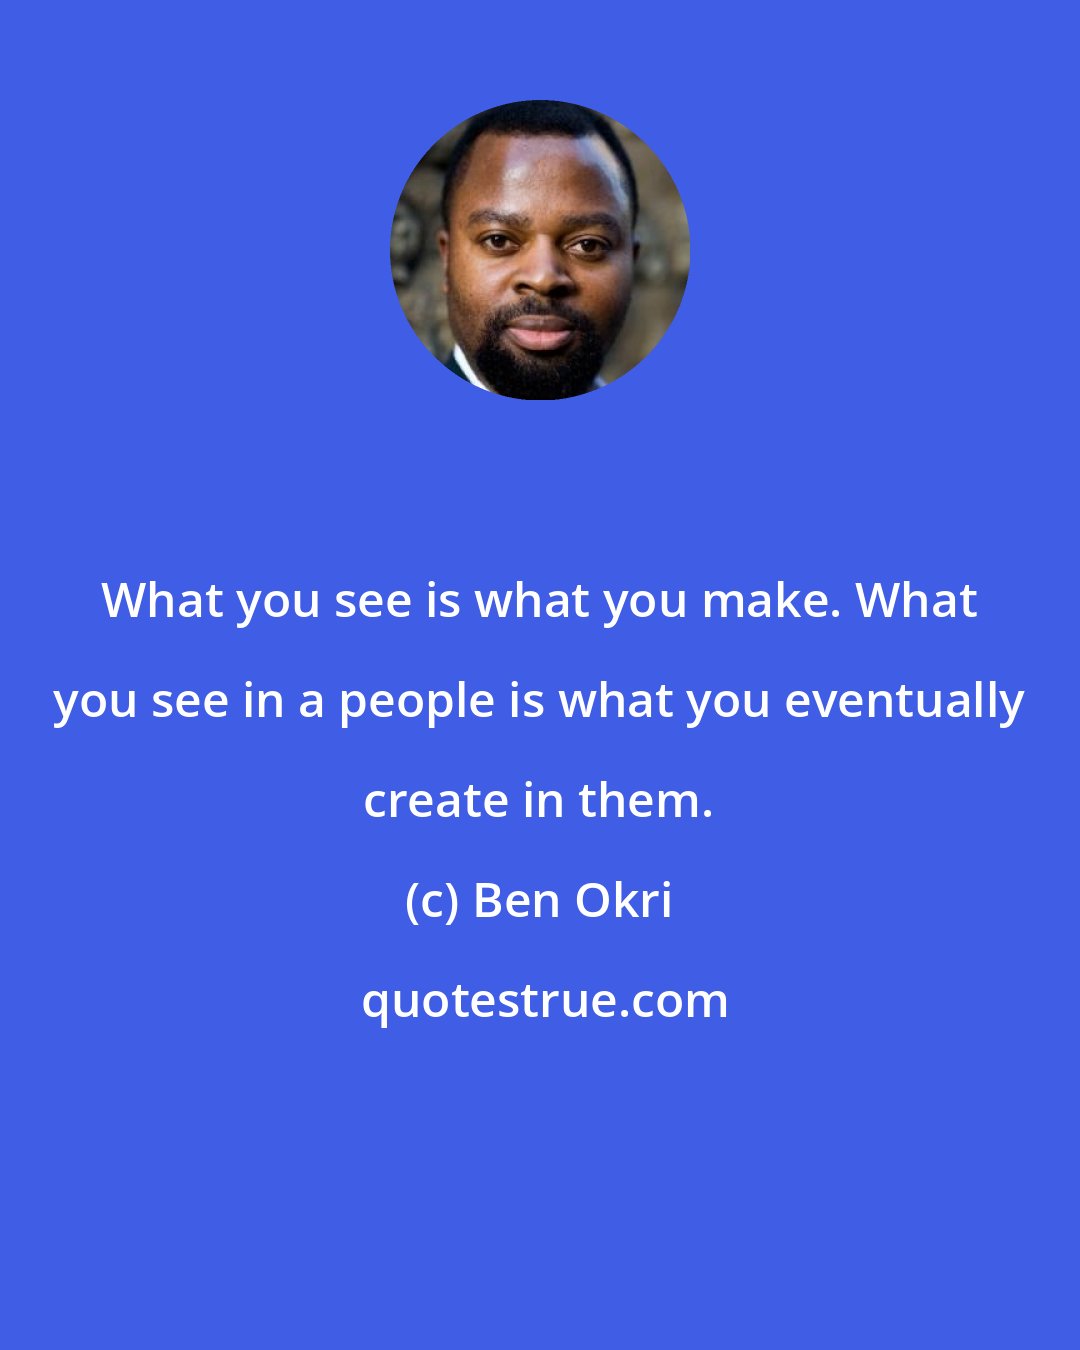 Ben Okri: What you see is what you make. What you see in a people is what you eventually create in them.